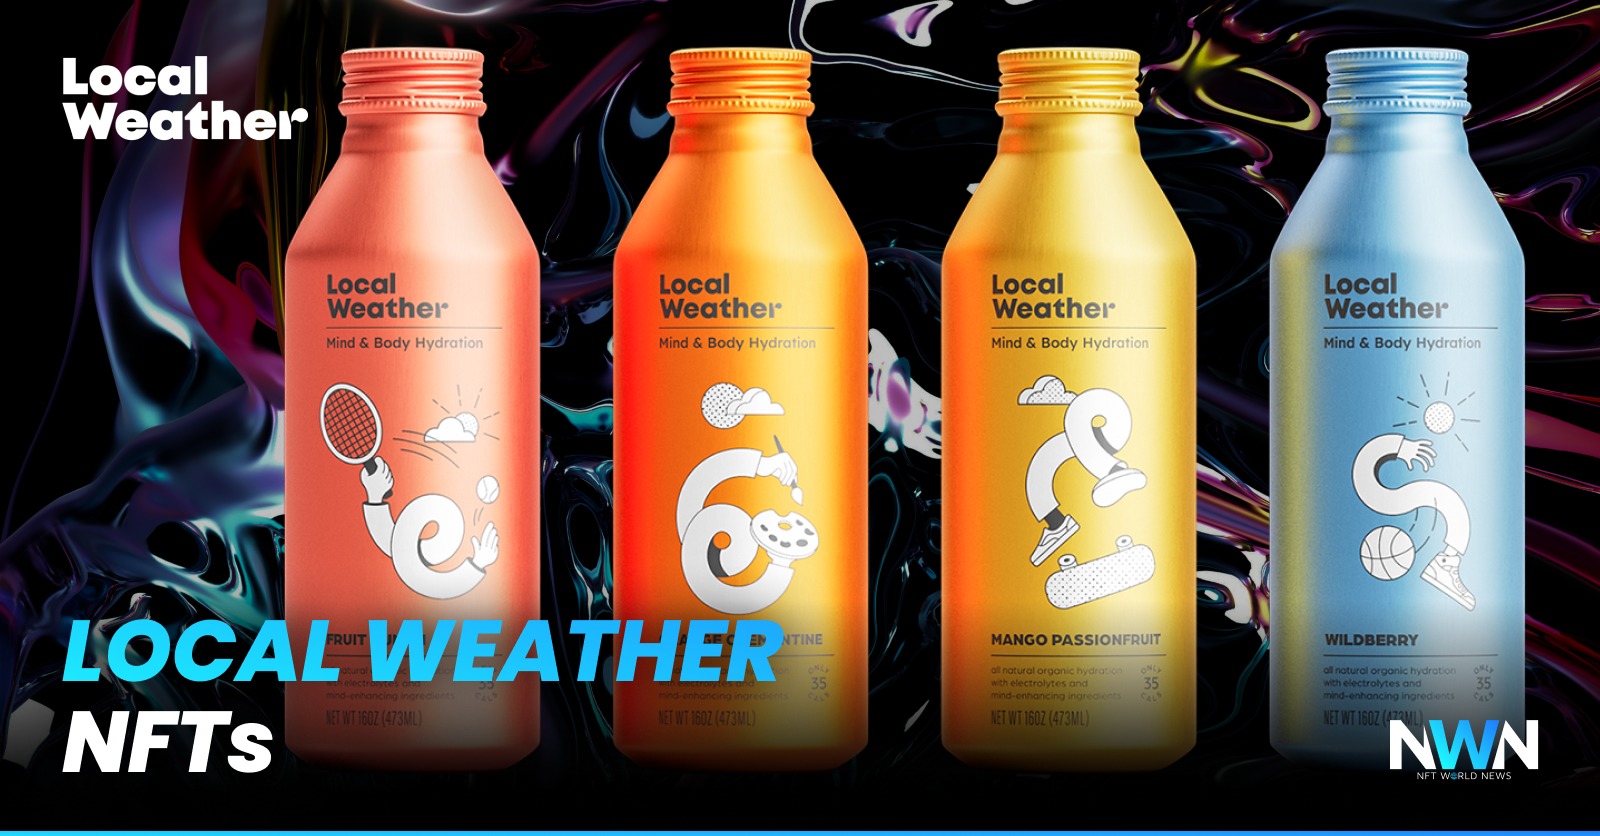 AJ Vaynerchuk Launches His Own NFT Project Called Local Weather